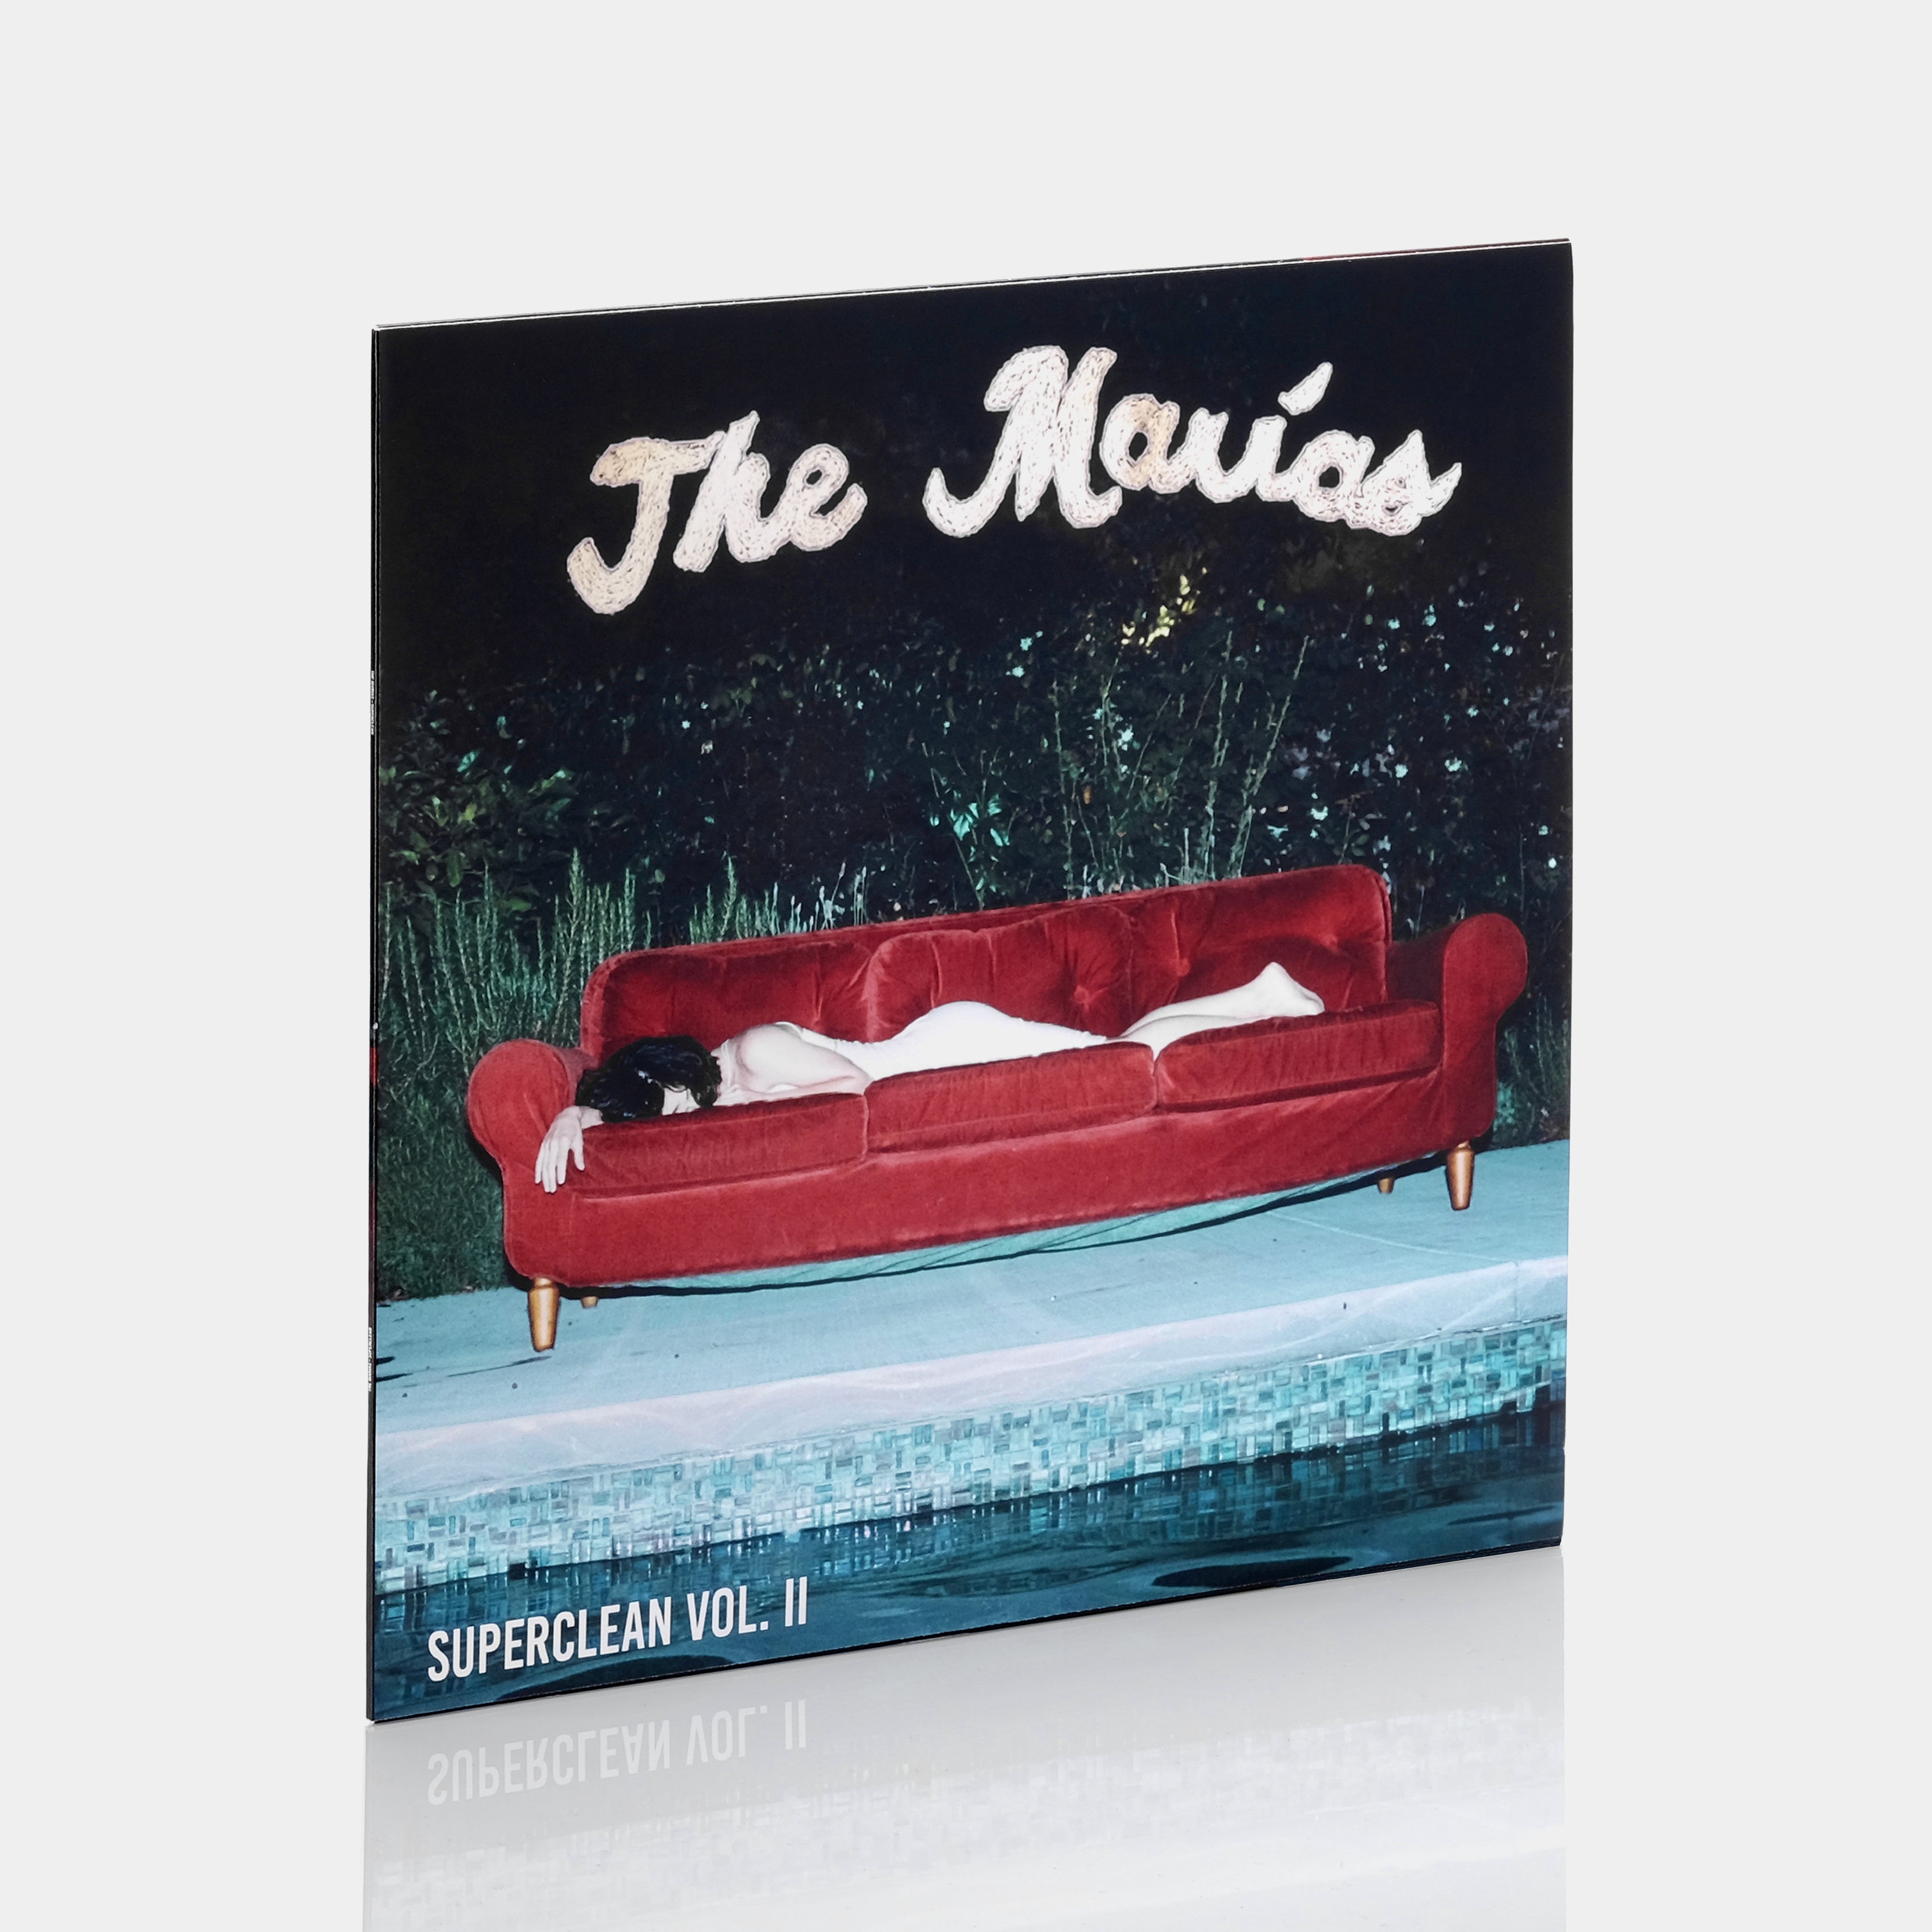 The Marías - Superclean Vol. I & Superclean Vol. II (Limited Edition Reissue) LP Translucent Red Vinyl Record